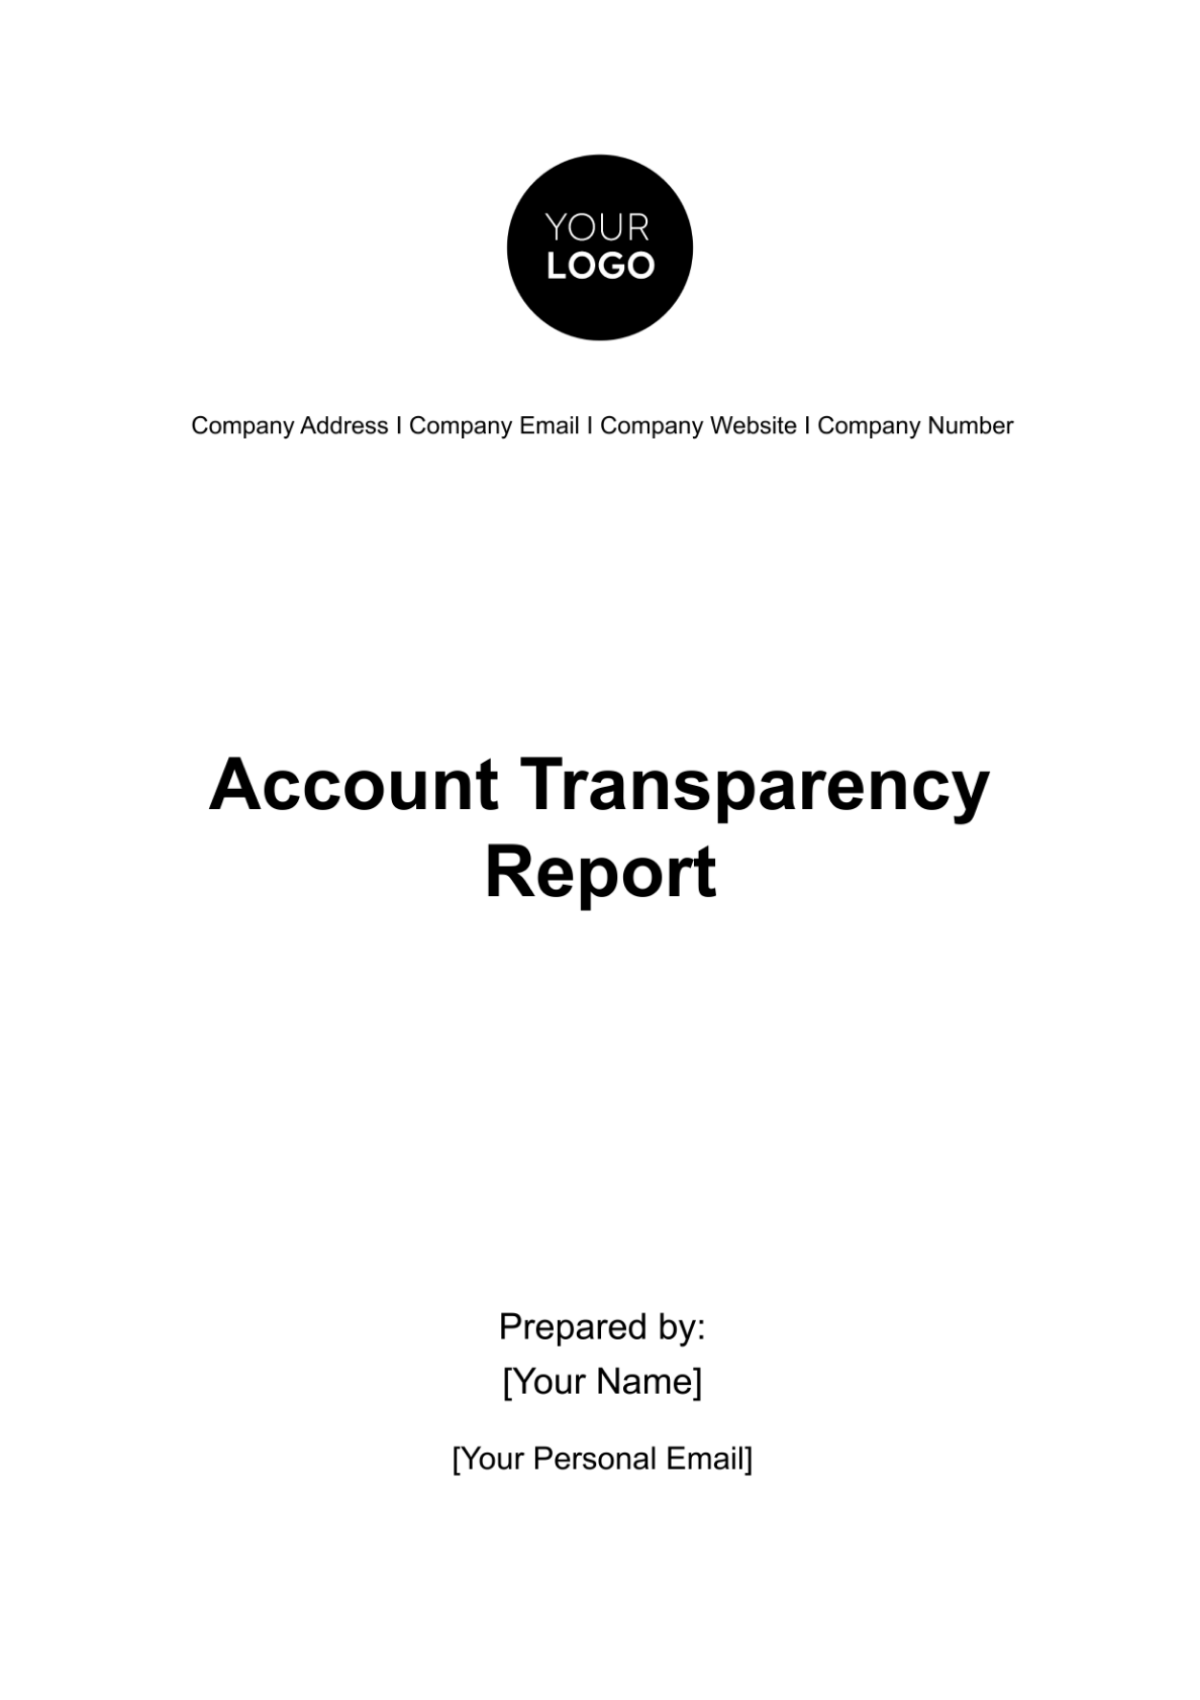 Free Account Transparency Report Template